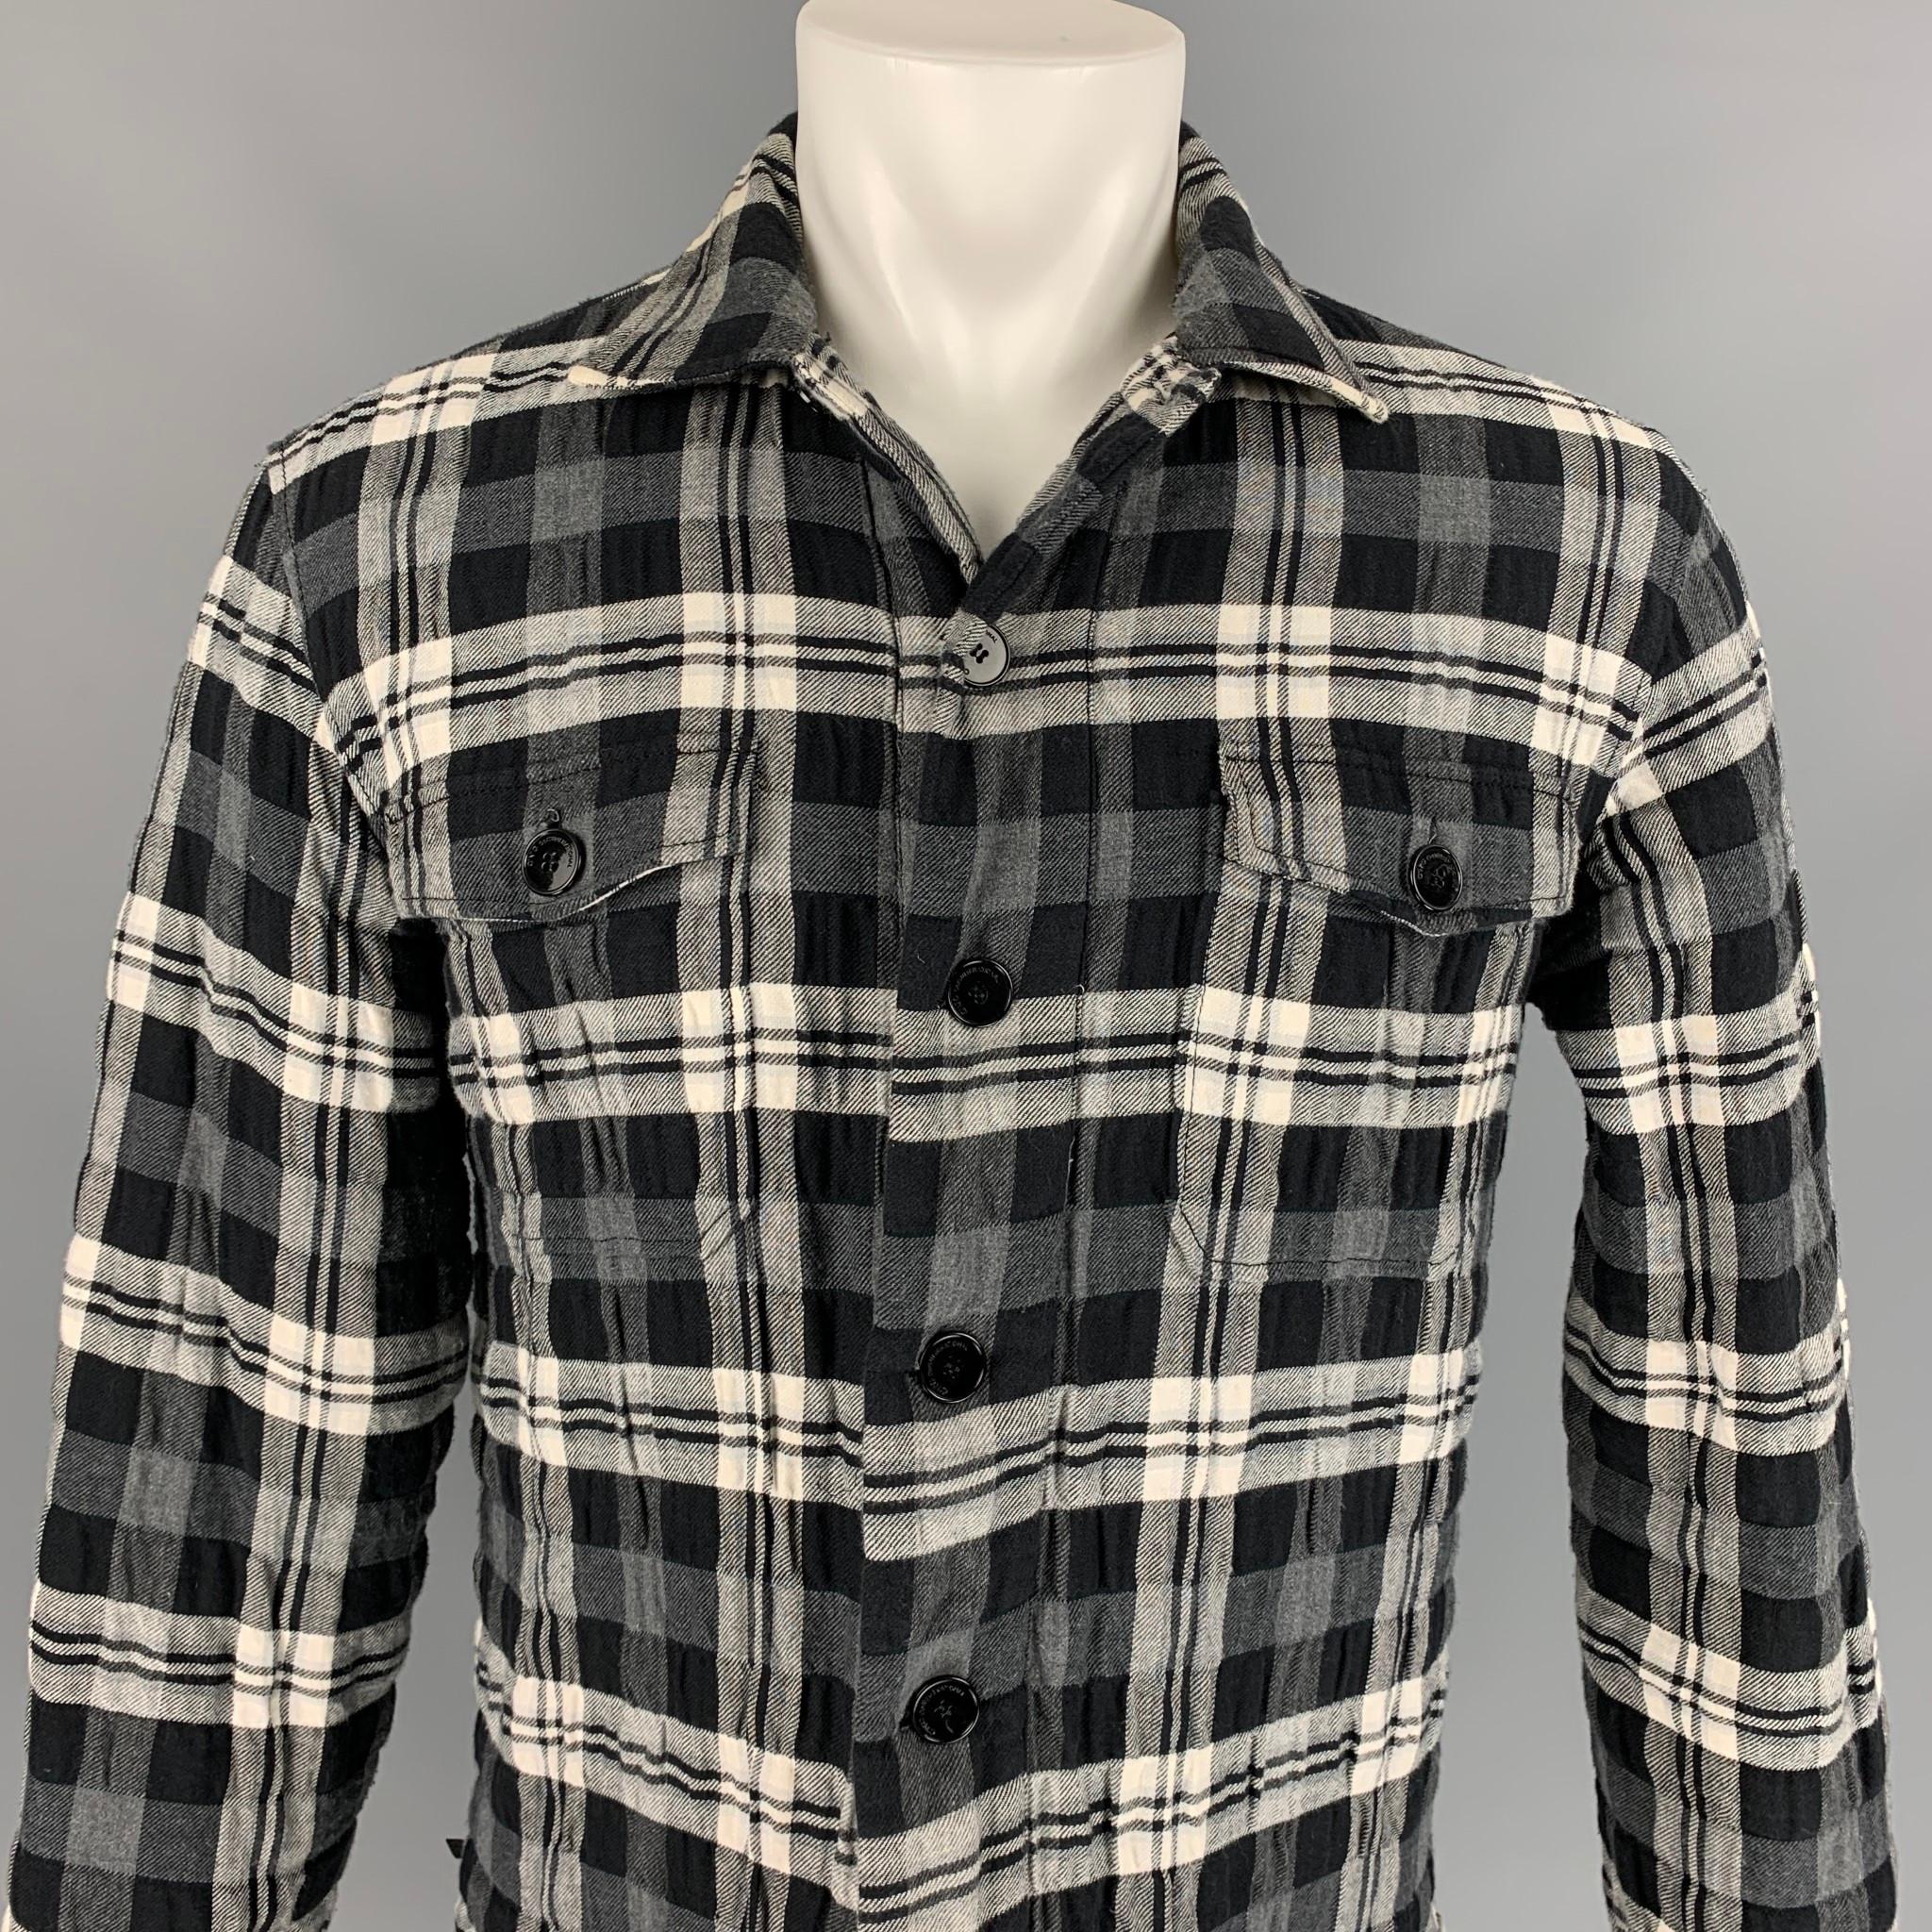 C'N'C by CoSTUME NATIONAL shirt jacket comes in a black & white plaid polyester / cotton with a quilted liner featuring a spread collar, adjustable side tabs, front pockets, and a buttoned closure. Made in Italy. 

Very Good Pre-Owned